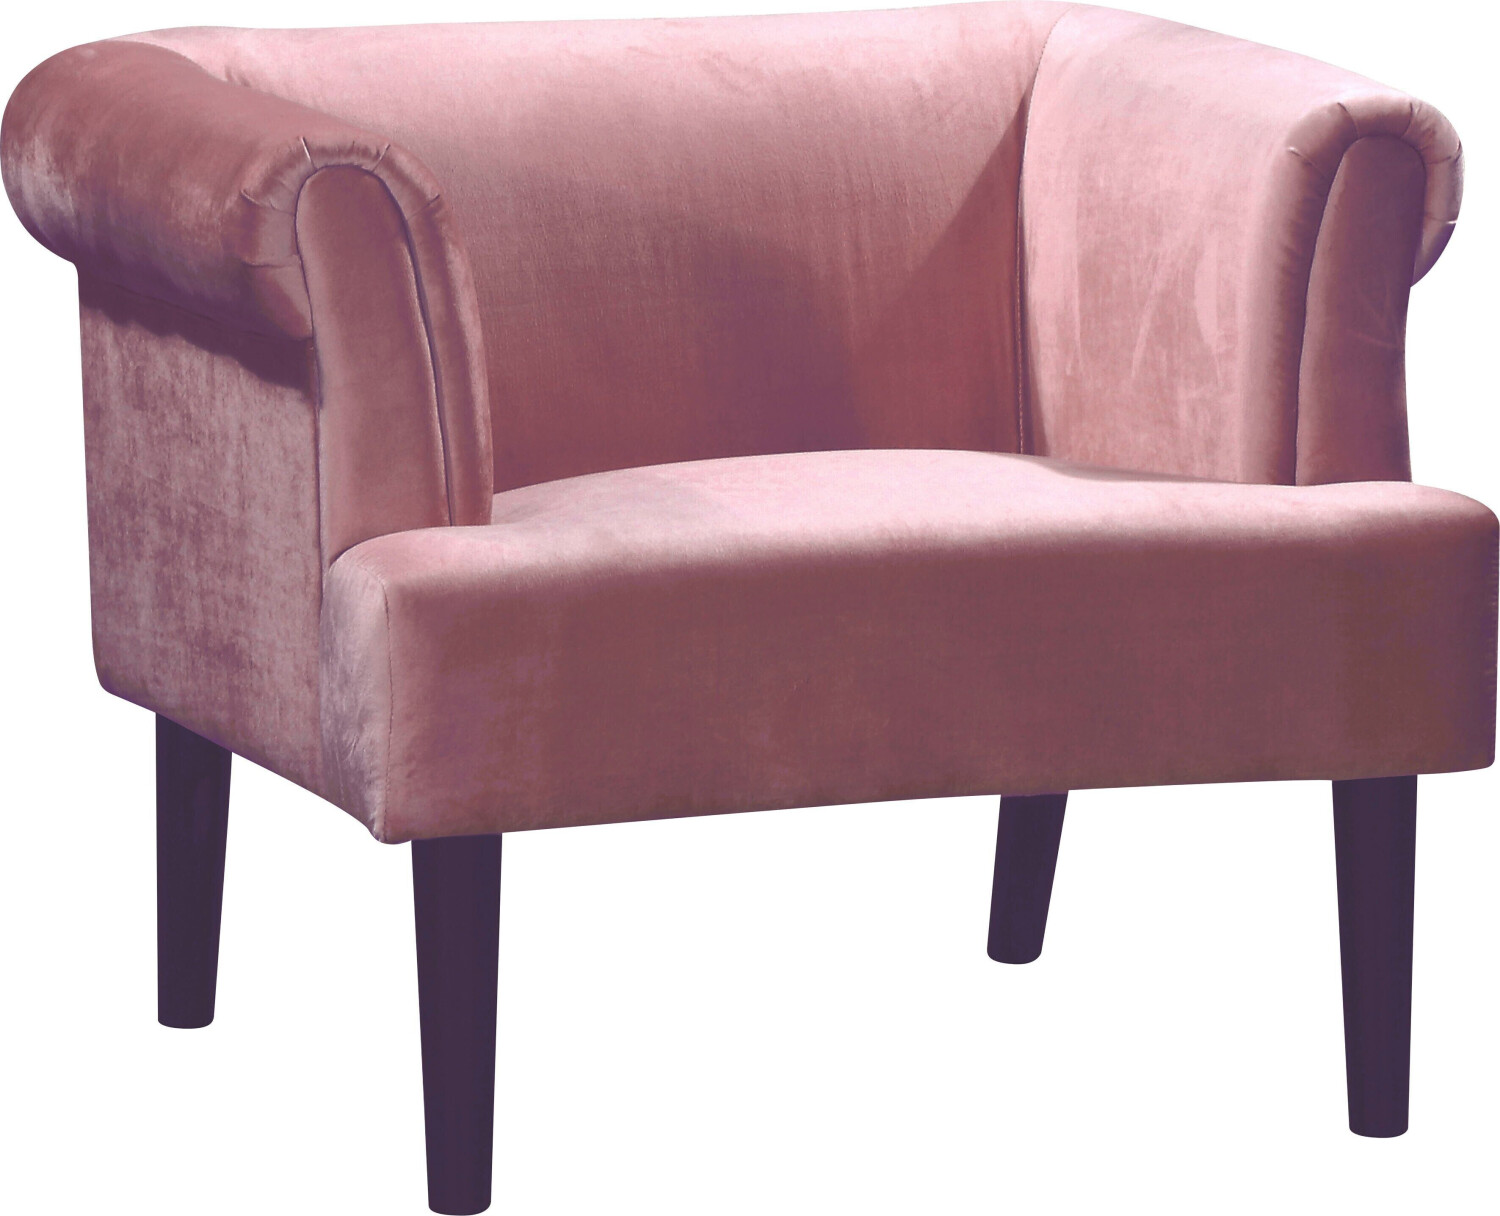 Atlantic Home Collection Loungesessel mit Wellenunterfederung rosa